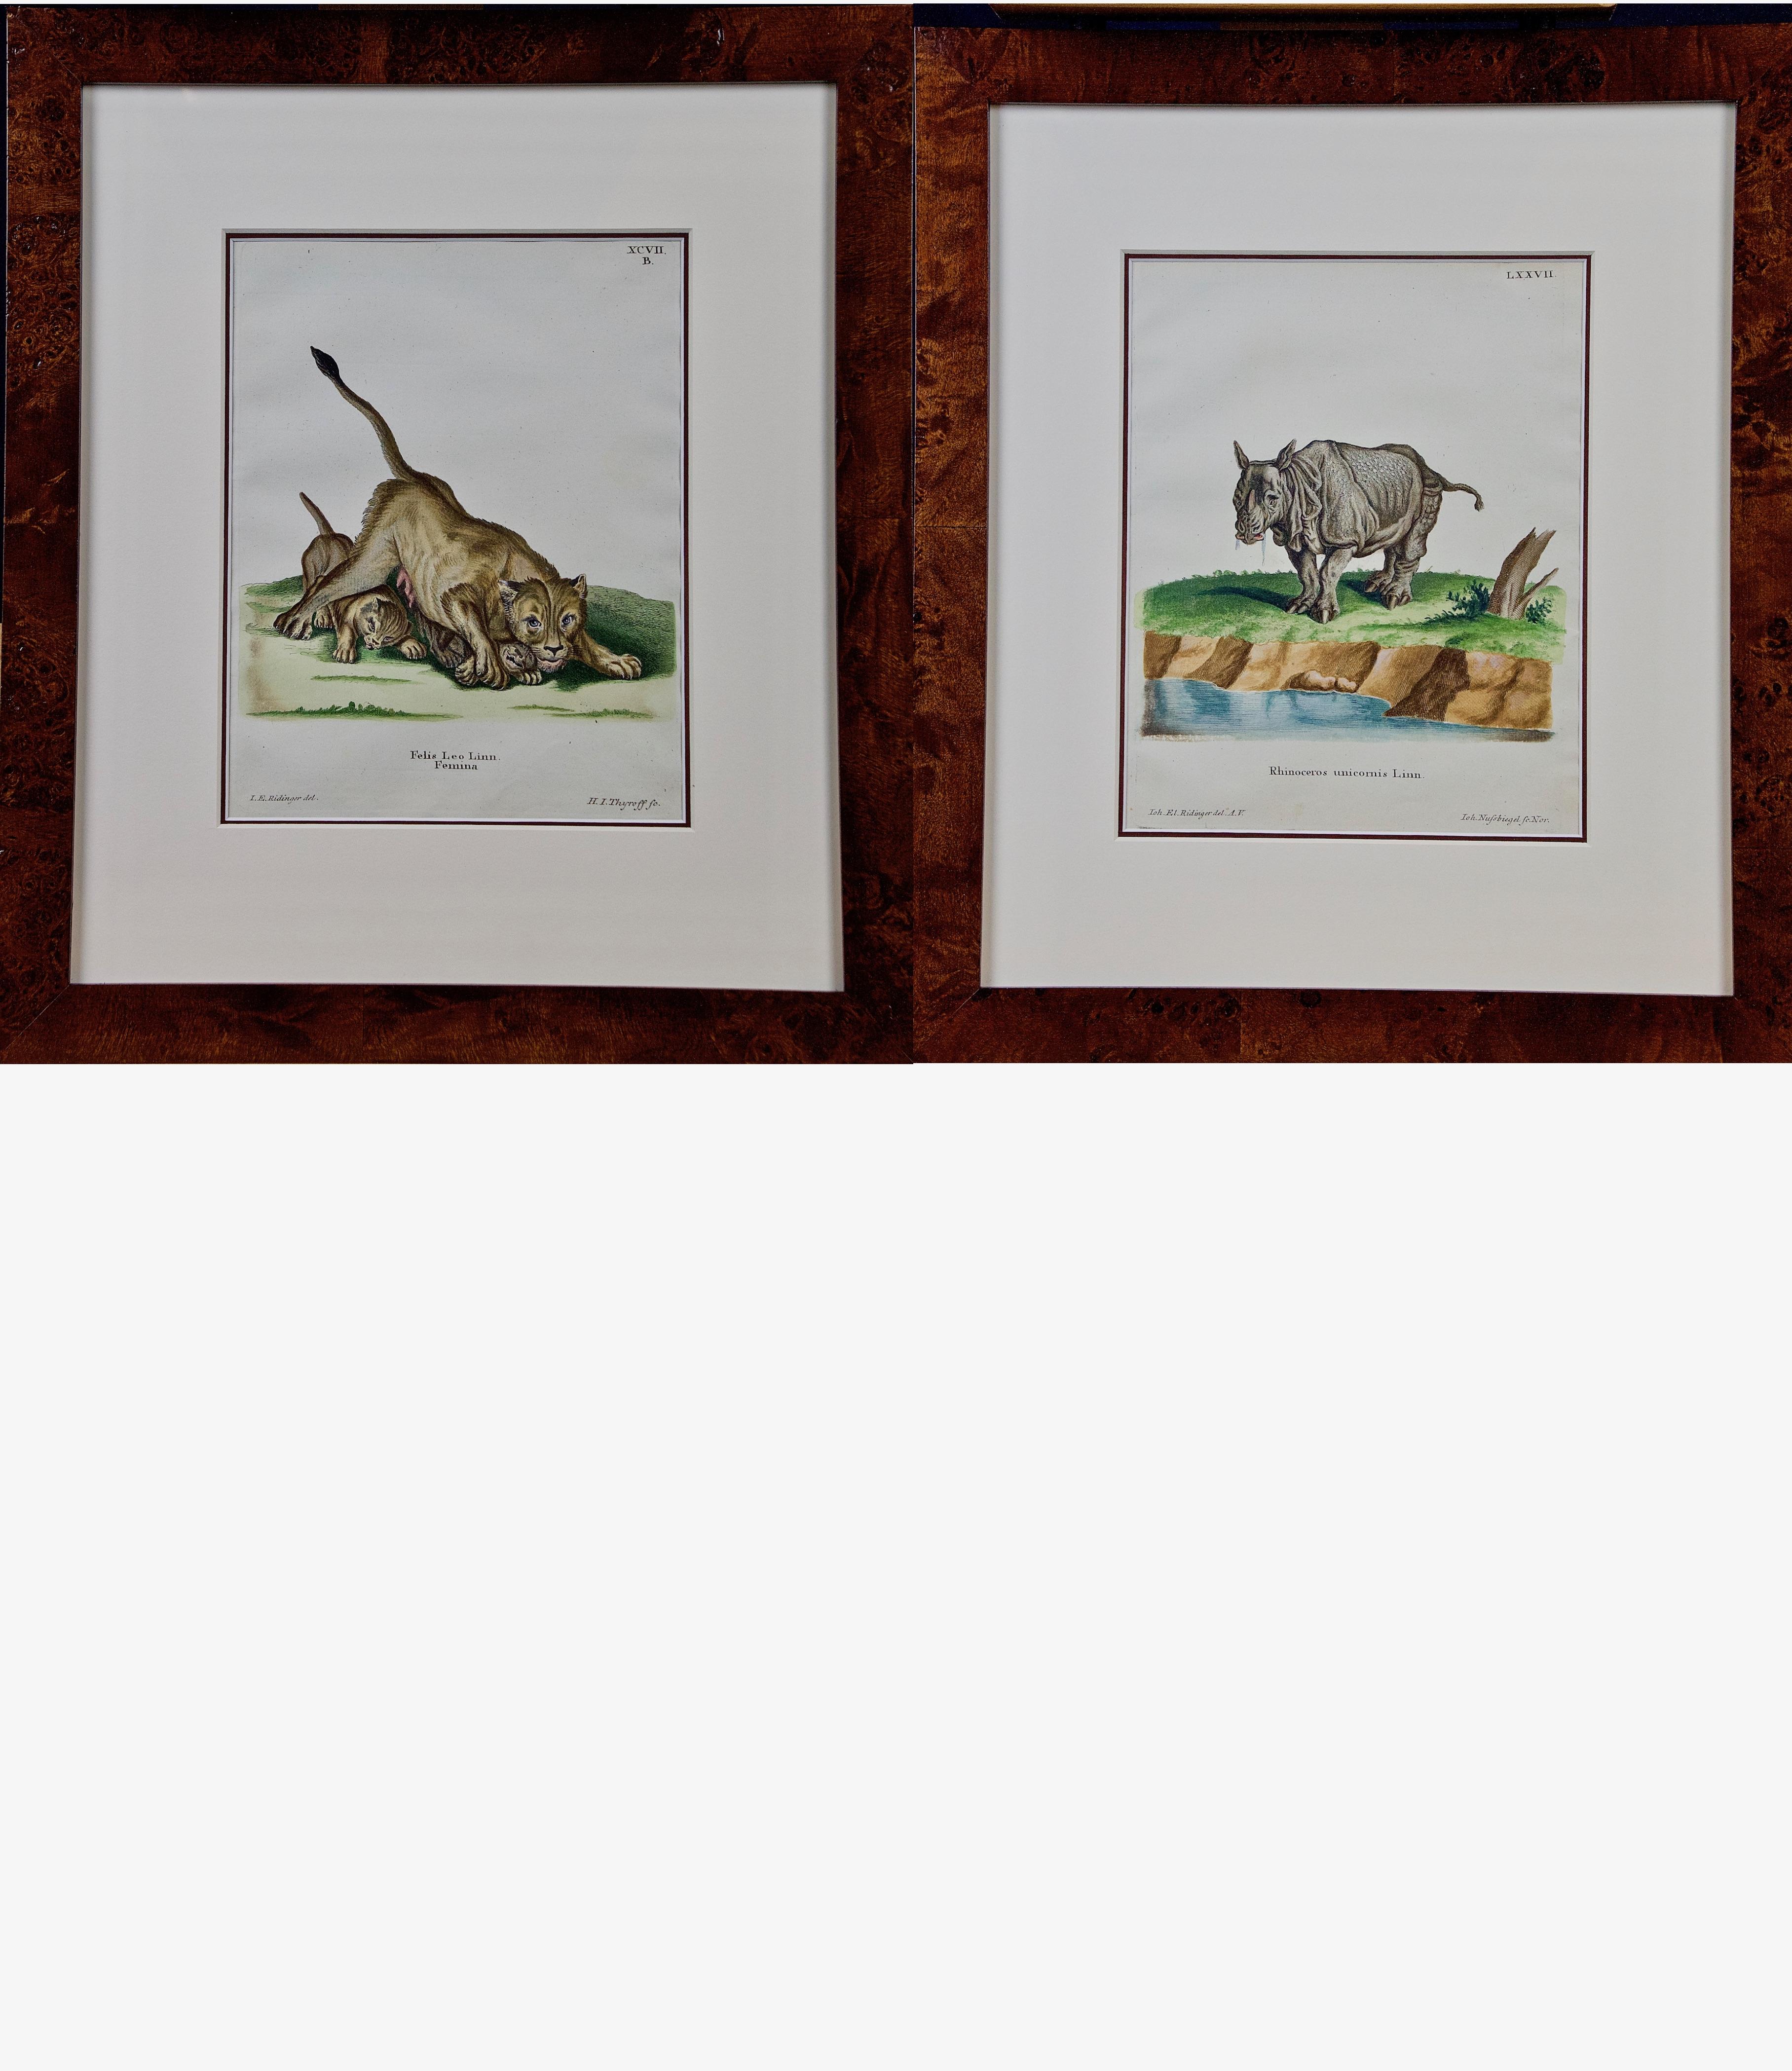 Johann Elias Ridinger Animal Print - A Pair of Hand Colored Engravings of an African Lioness and her Cubs and a Rhino